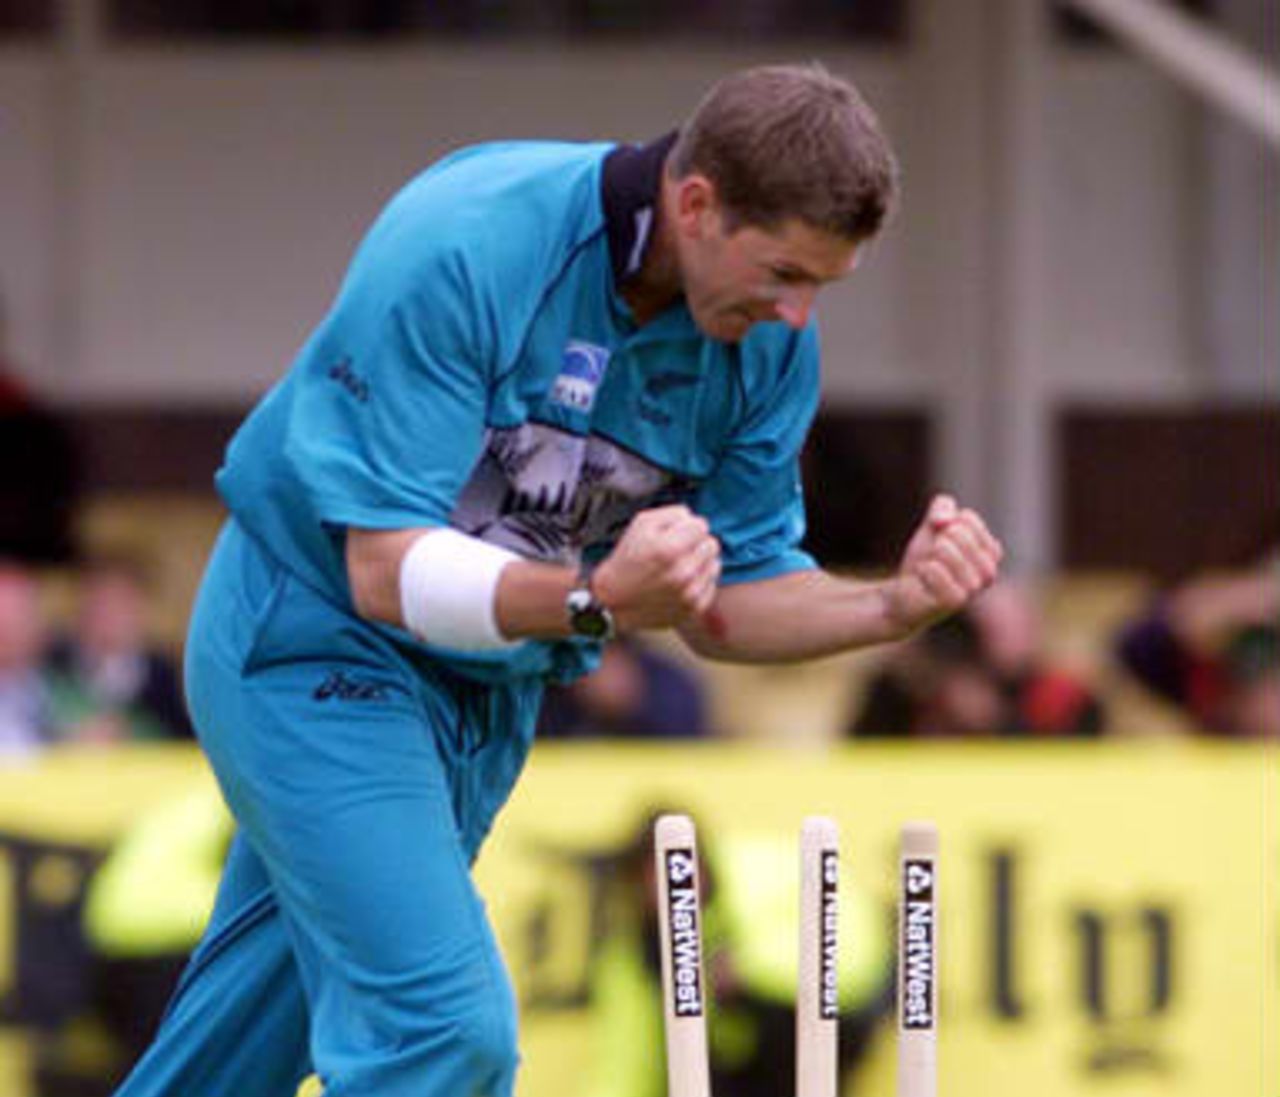 New Zealand bowler Geoff Allott celebrates after the run out of South Africa's captain Hansie Cronje 10 June 1999. Allott had earlier broken the world record for wickets taken in a World Cup series with 19 during their Super Six match in the Cricket World Cup at Edgbaston